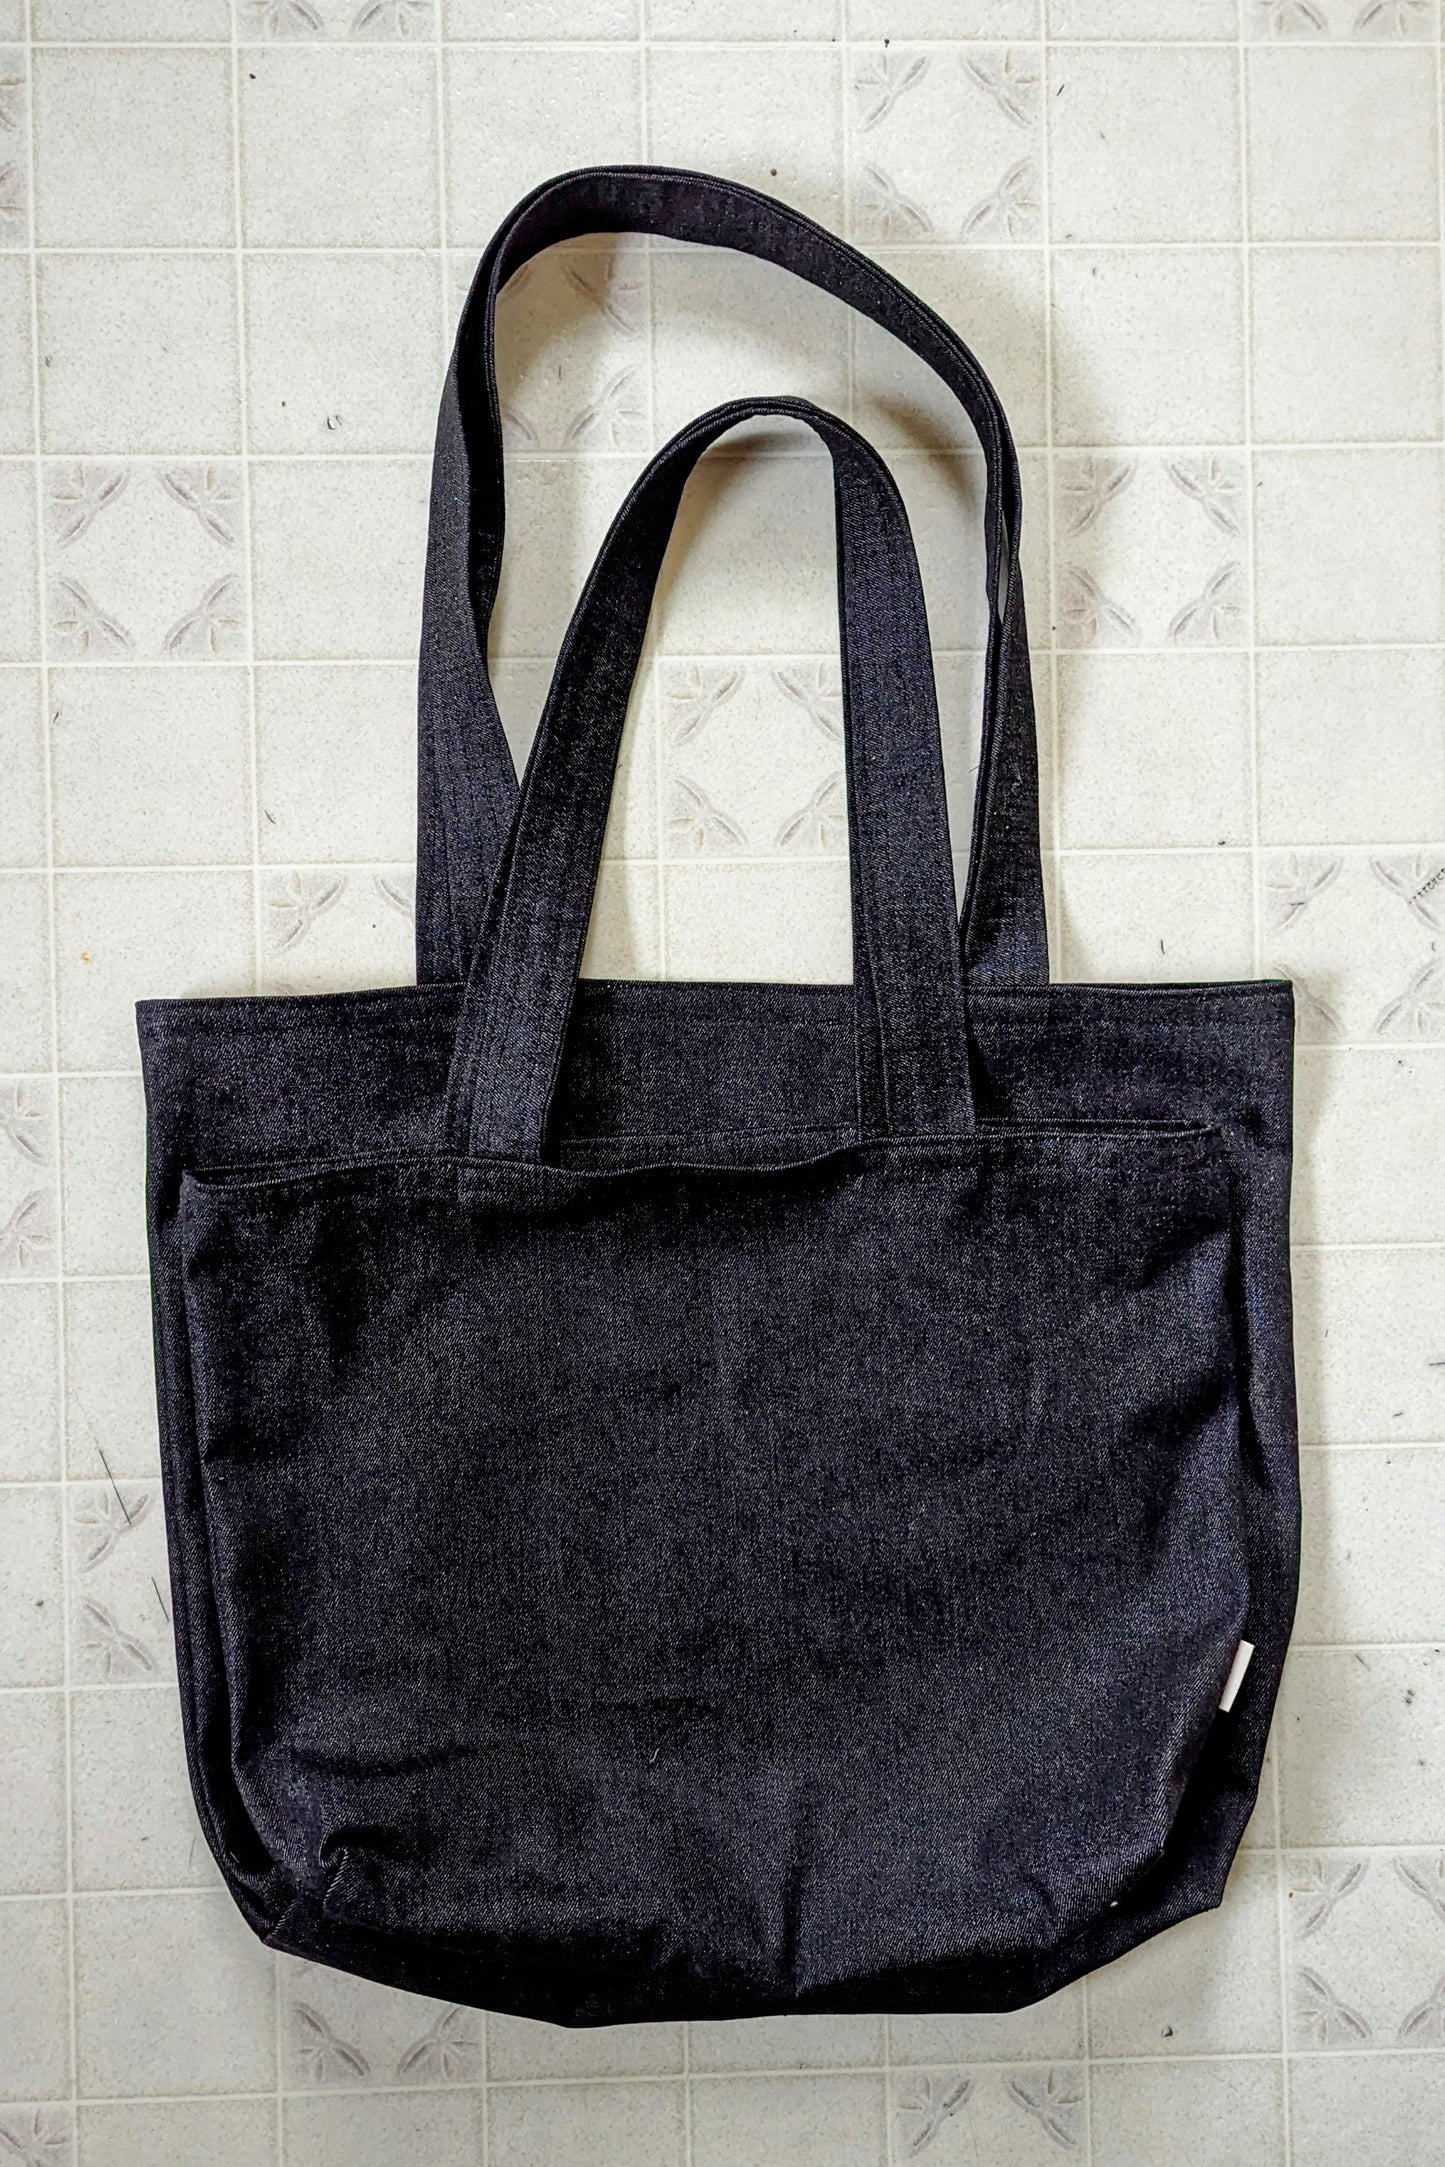 Charcoal Japanese Raw Denim Double Strap Tote Bag by Connally Goods